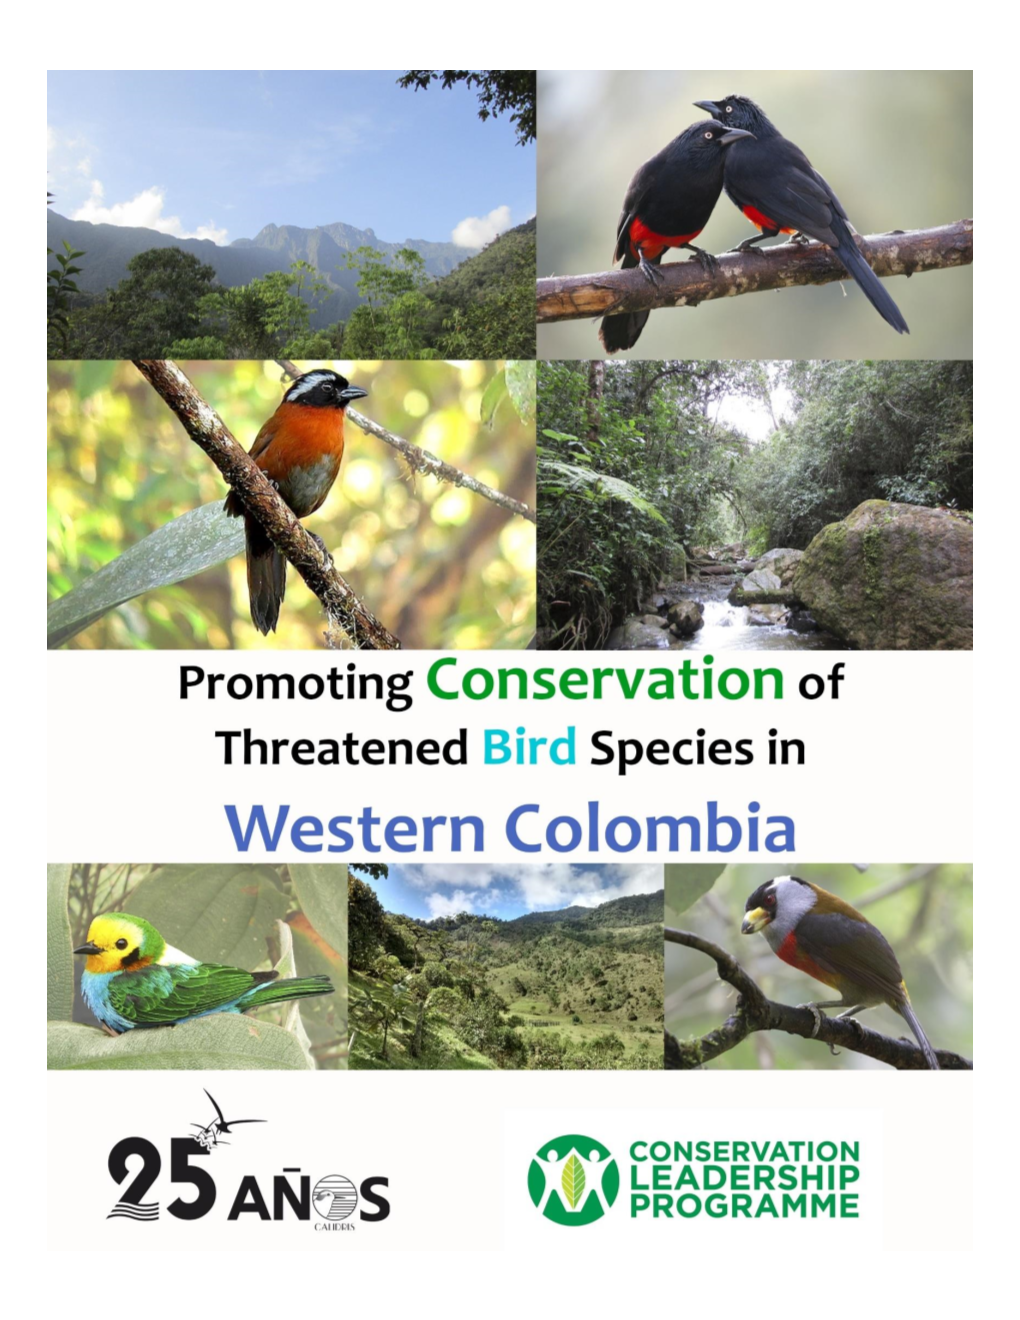 Promoting Conservation of Threatened Birds in Western Colombia